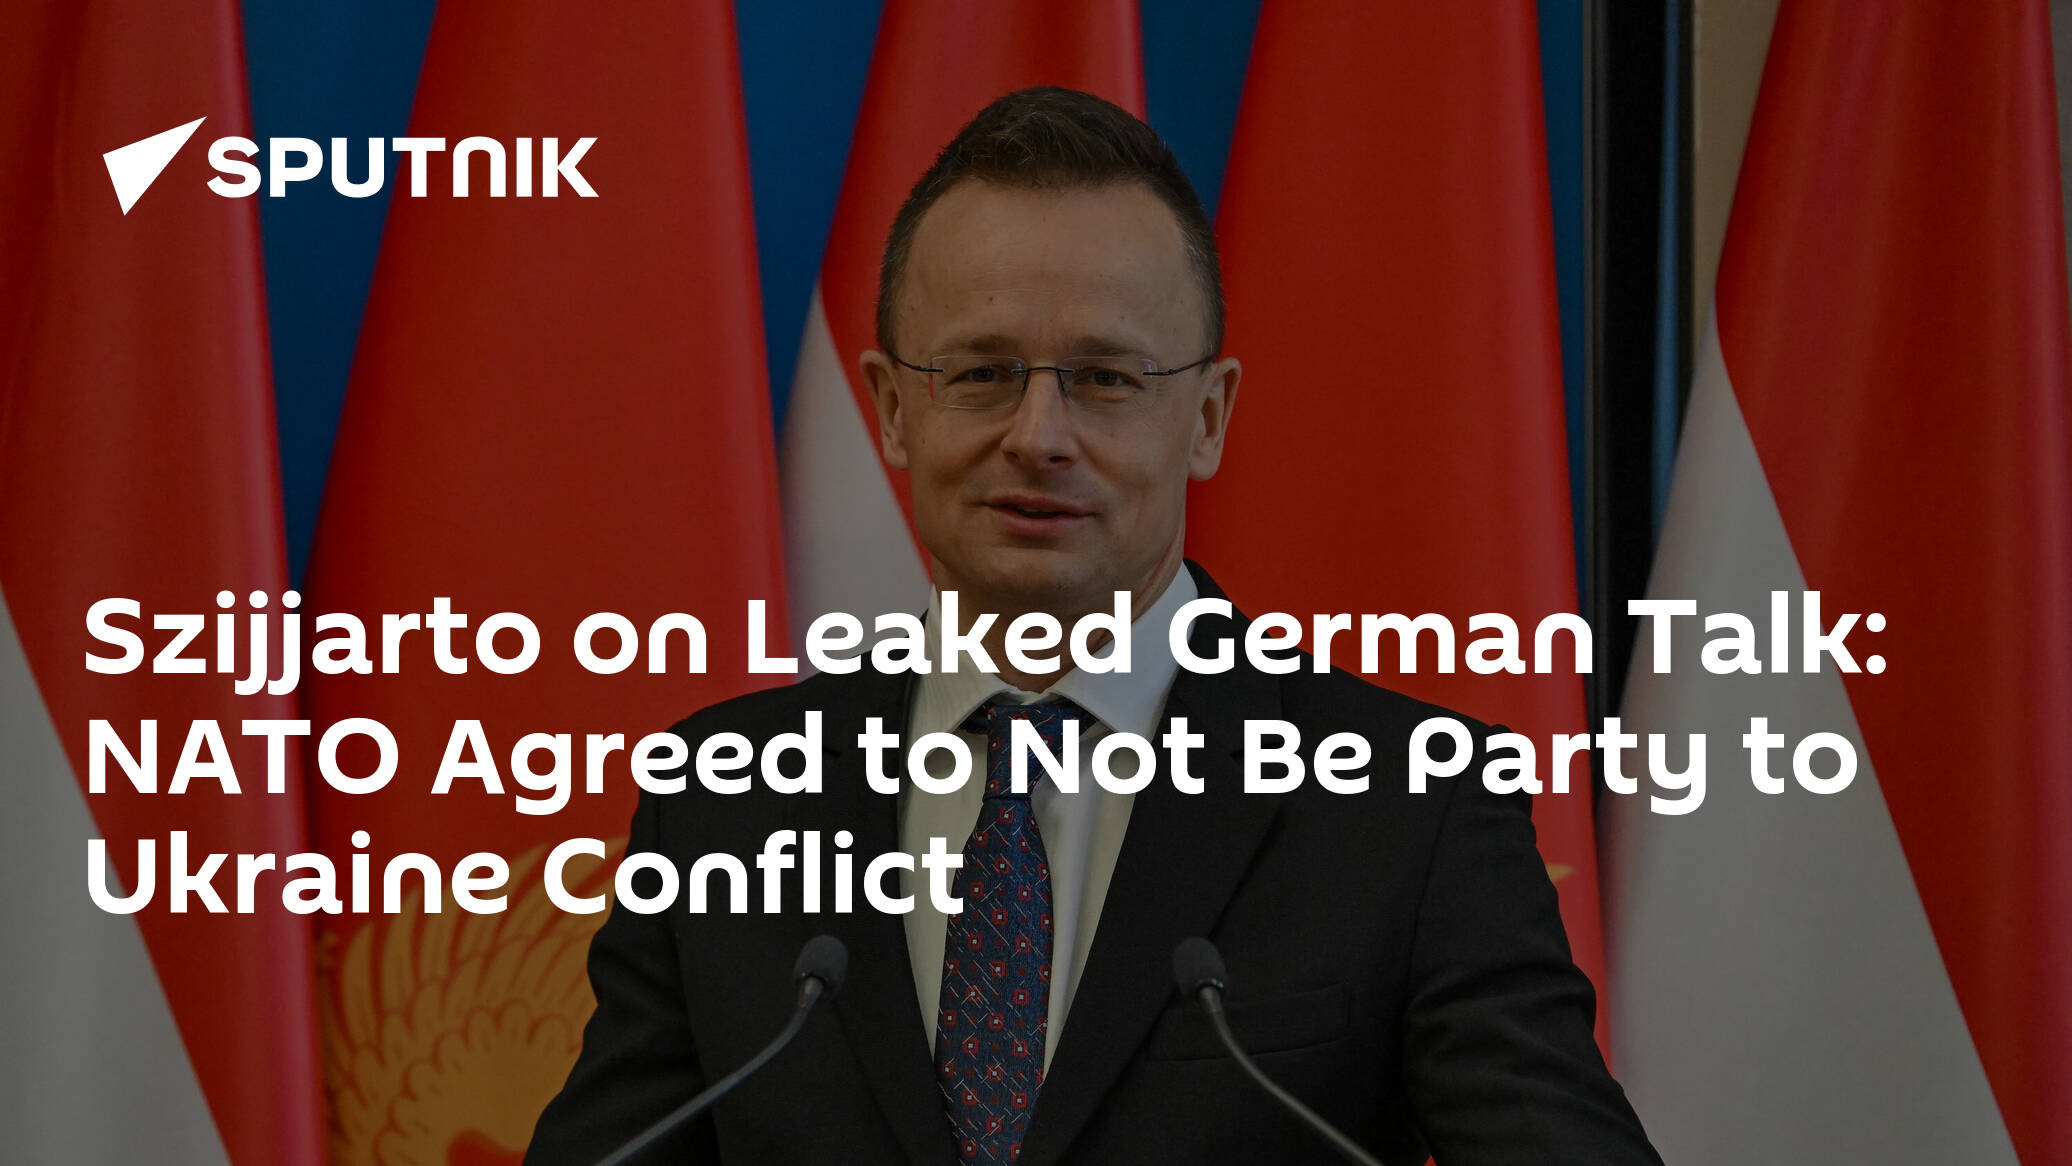 Szijjarto on Leaked German Talk: NATO Agreed to Not Be Party to Ukraine Conflict